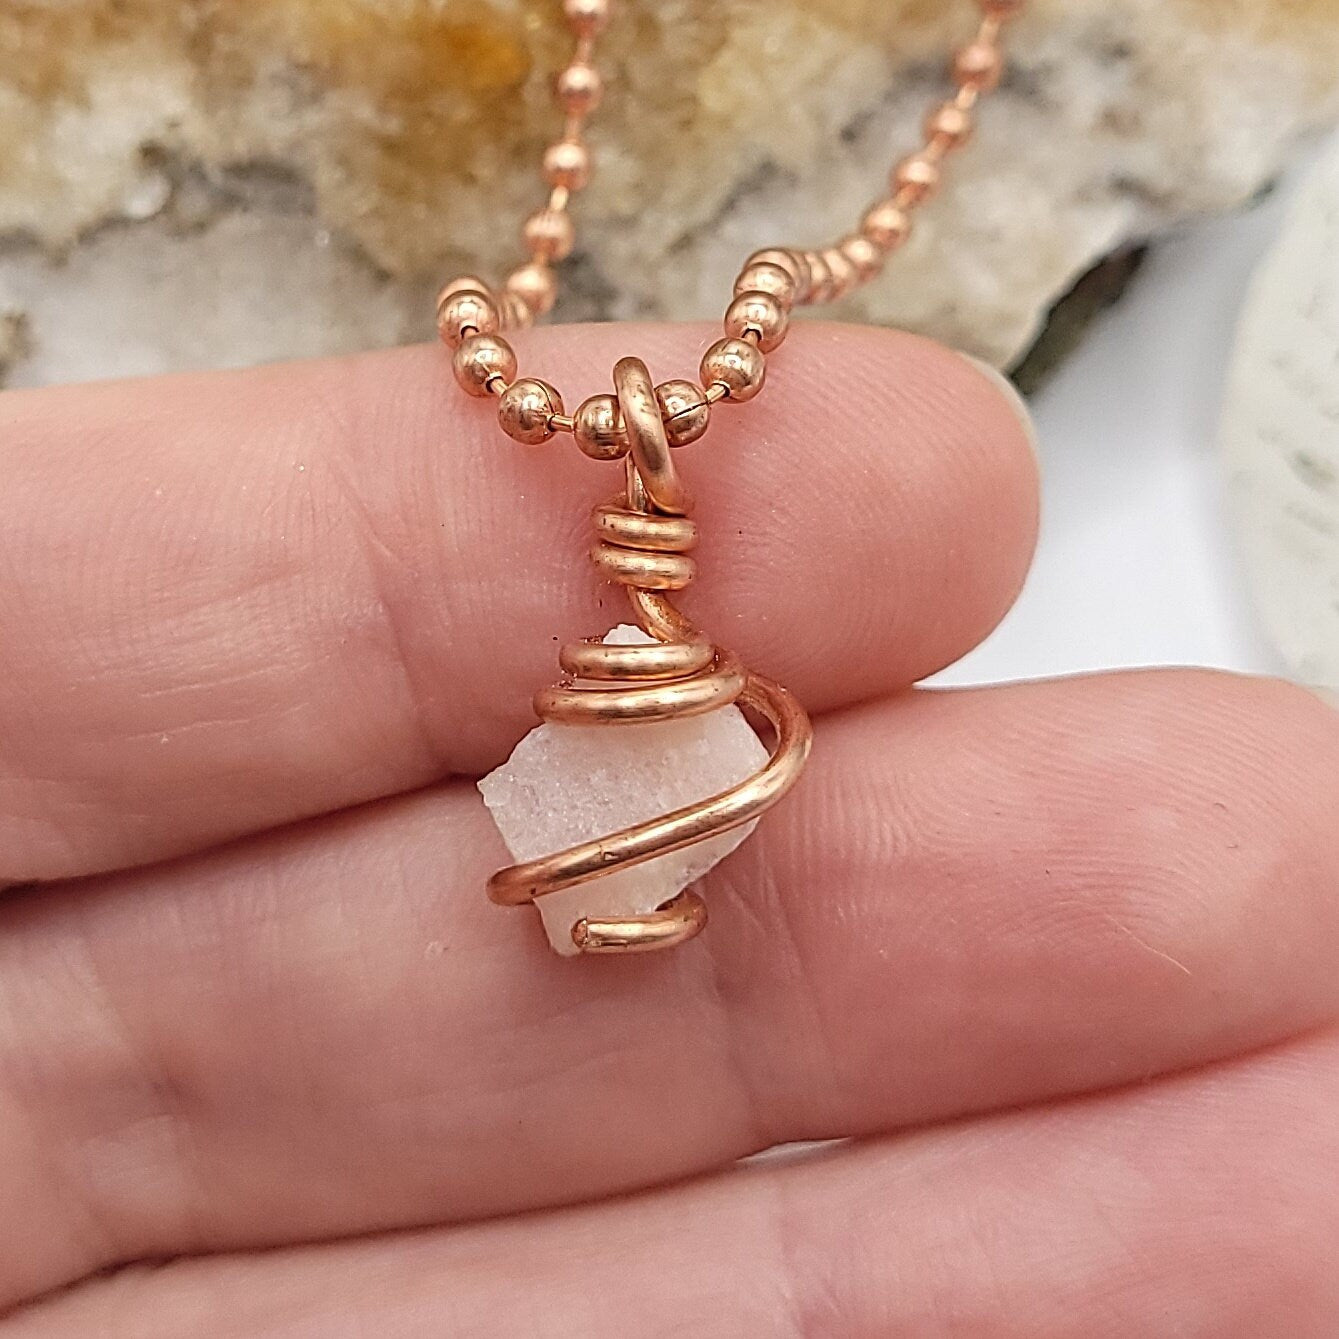 Pink Petalite Necklace, Copper Wire Wrapped Petalite Pendant, Raw Petalite Jewelry, Crystal Necklace